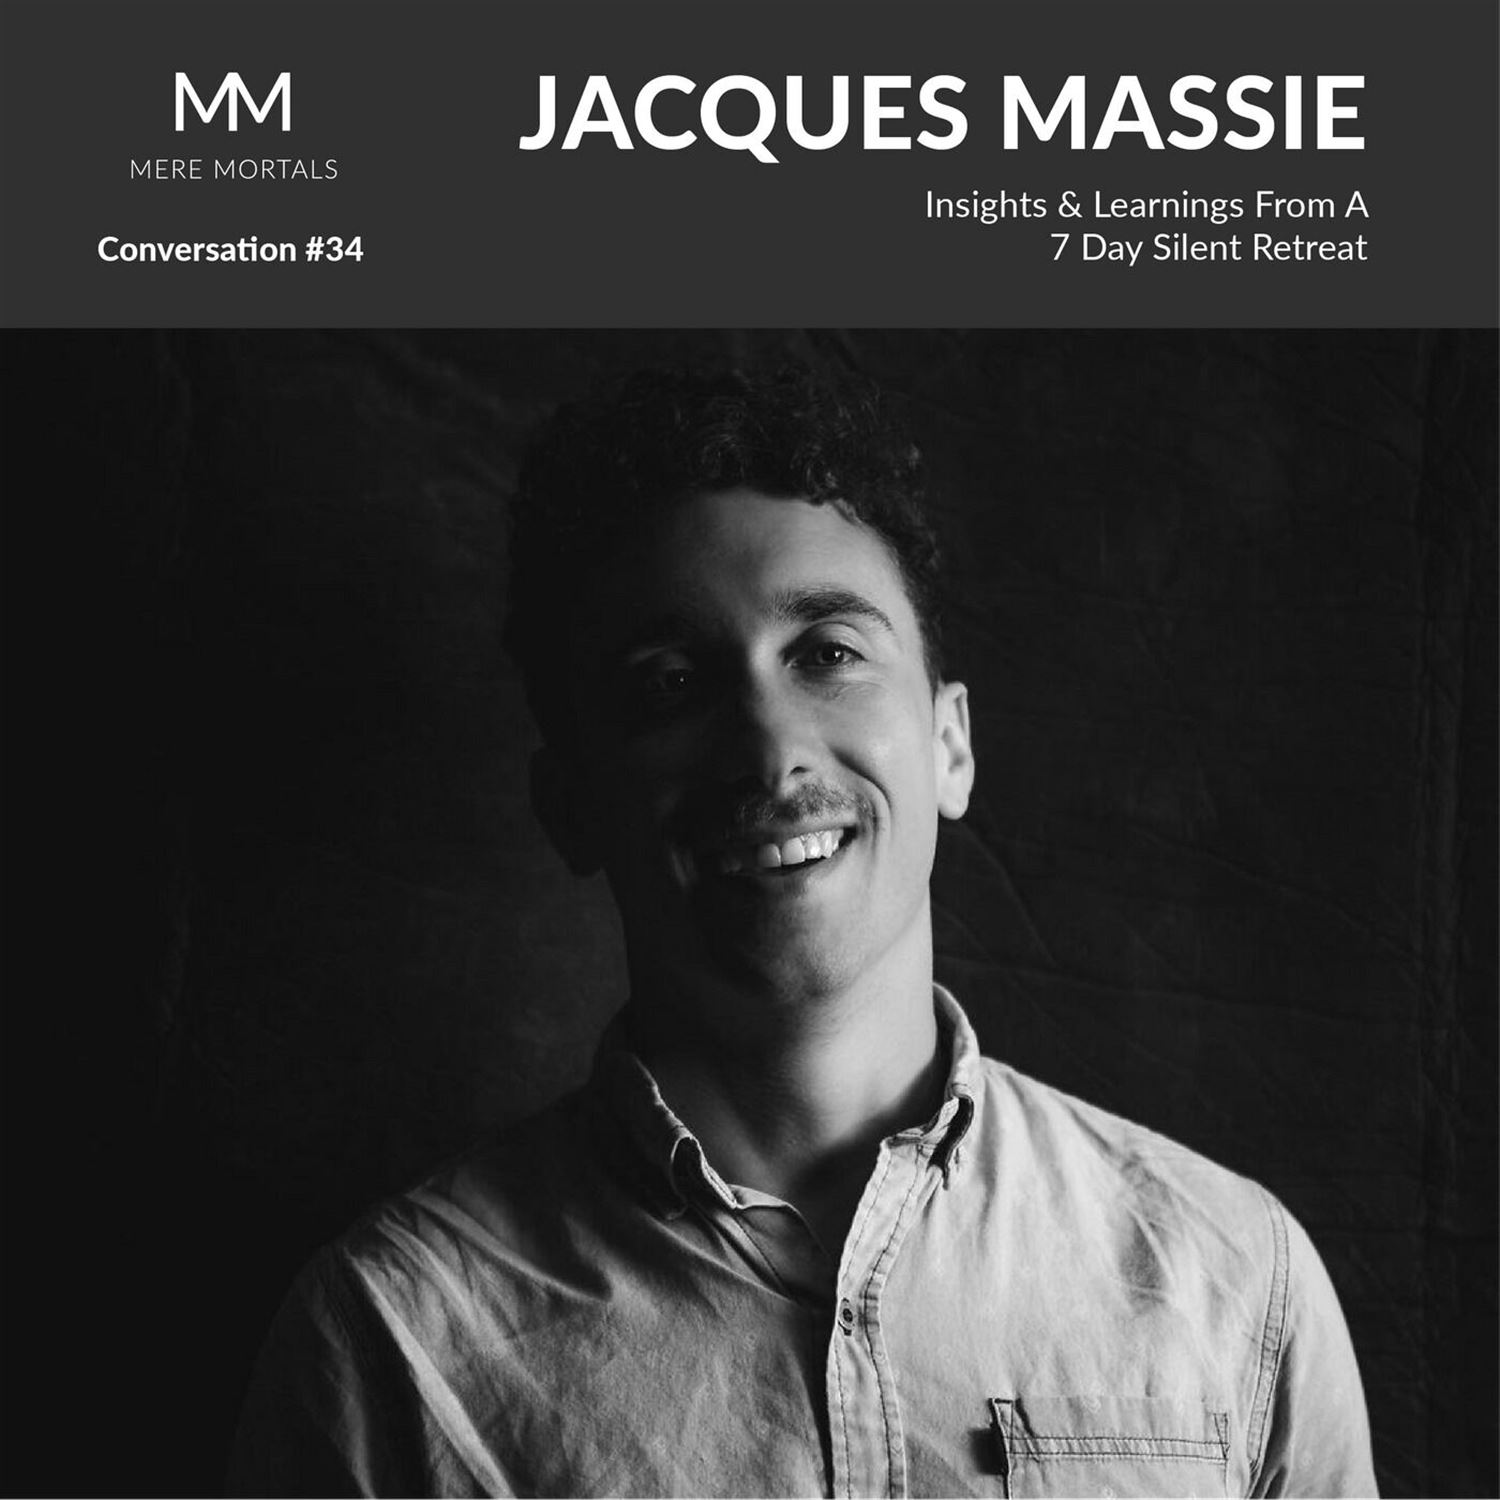 JACQUES MASSIE | Insights & Learnings From A 7 Day Silent Retreat: Mere Mortals Conversation #34